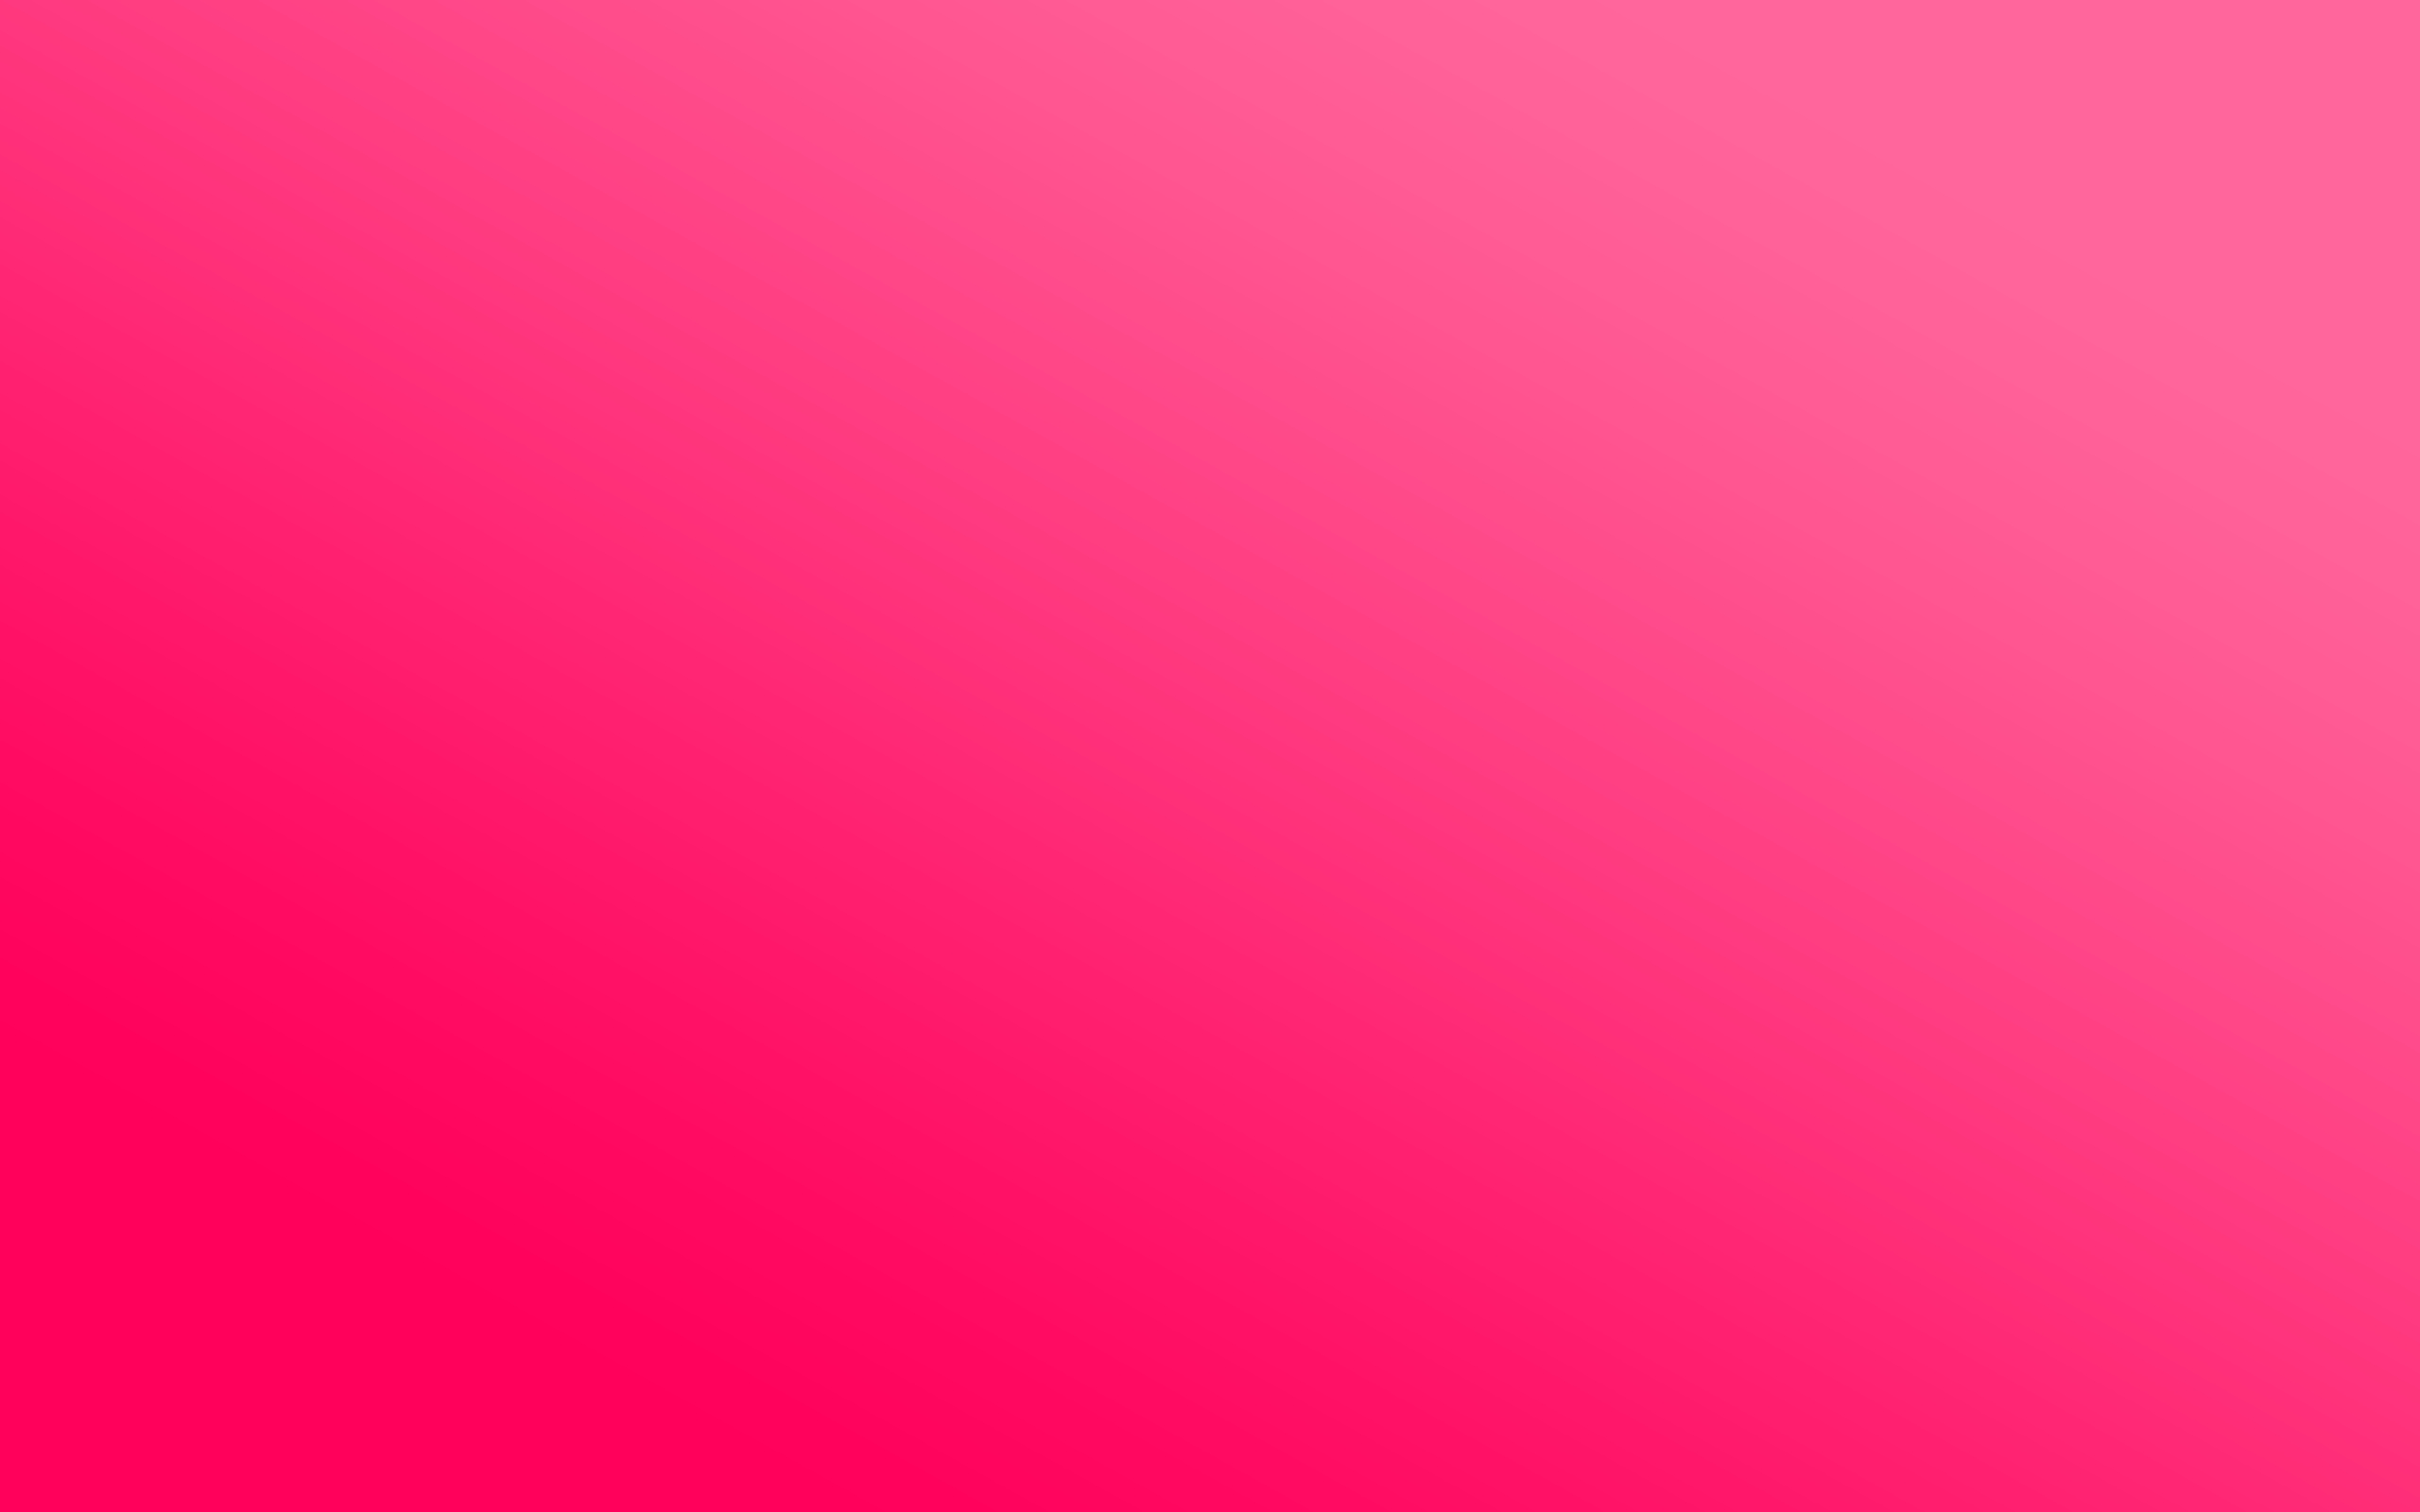 File Name 870499 Pink Solid Color HD Wallpapers Backgrounds 2560x1600